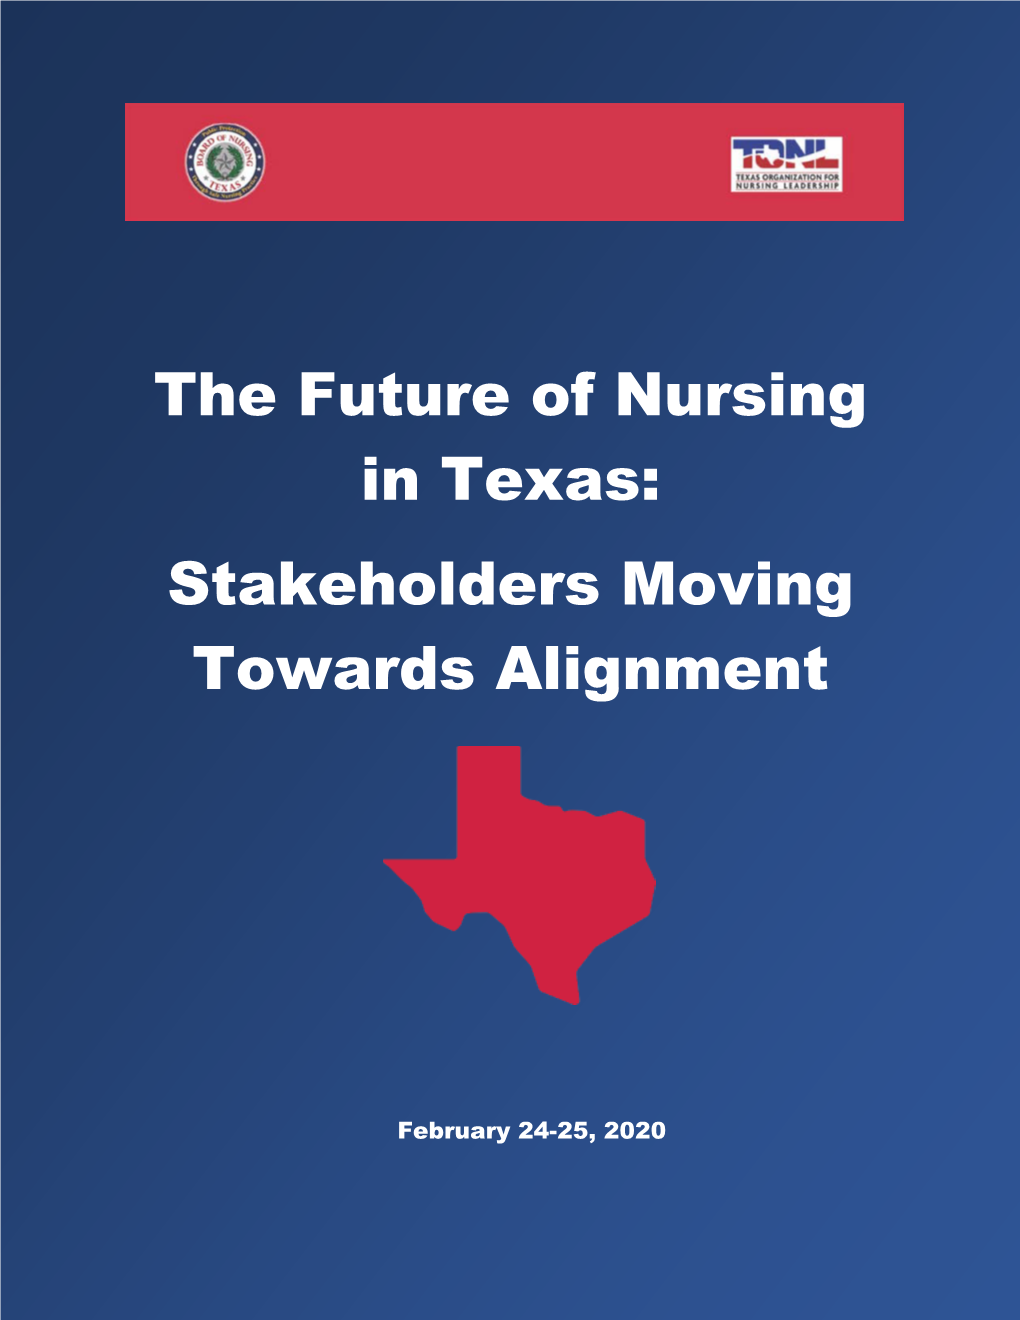 The Future of Nursing in Texas: Stakeholders Moving Towards Alignment